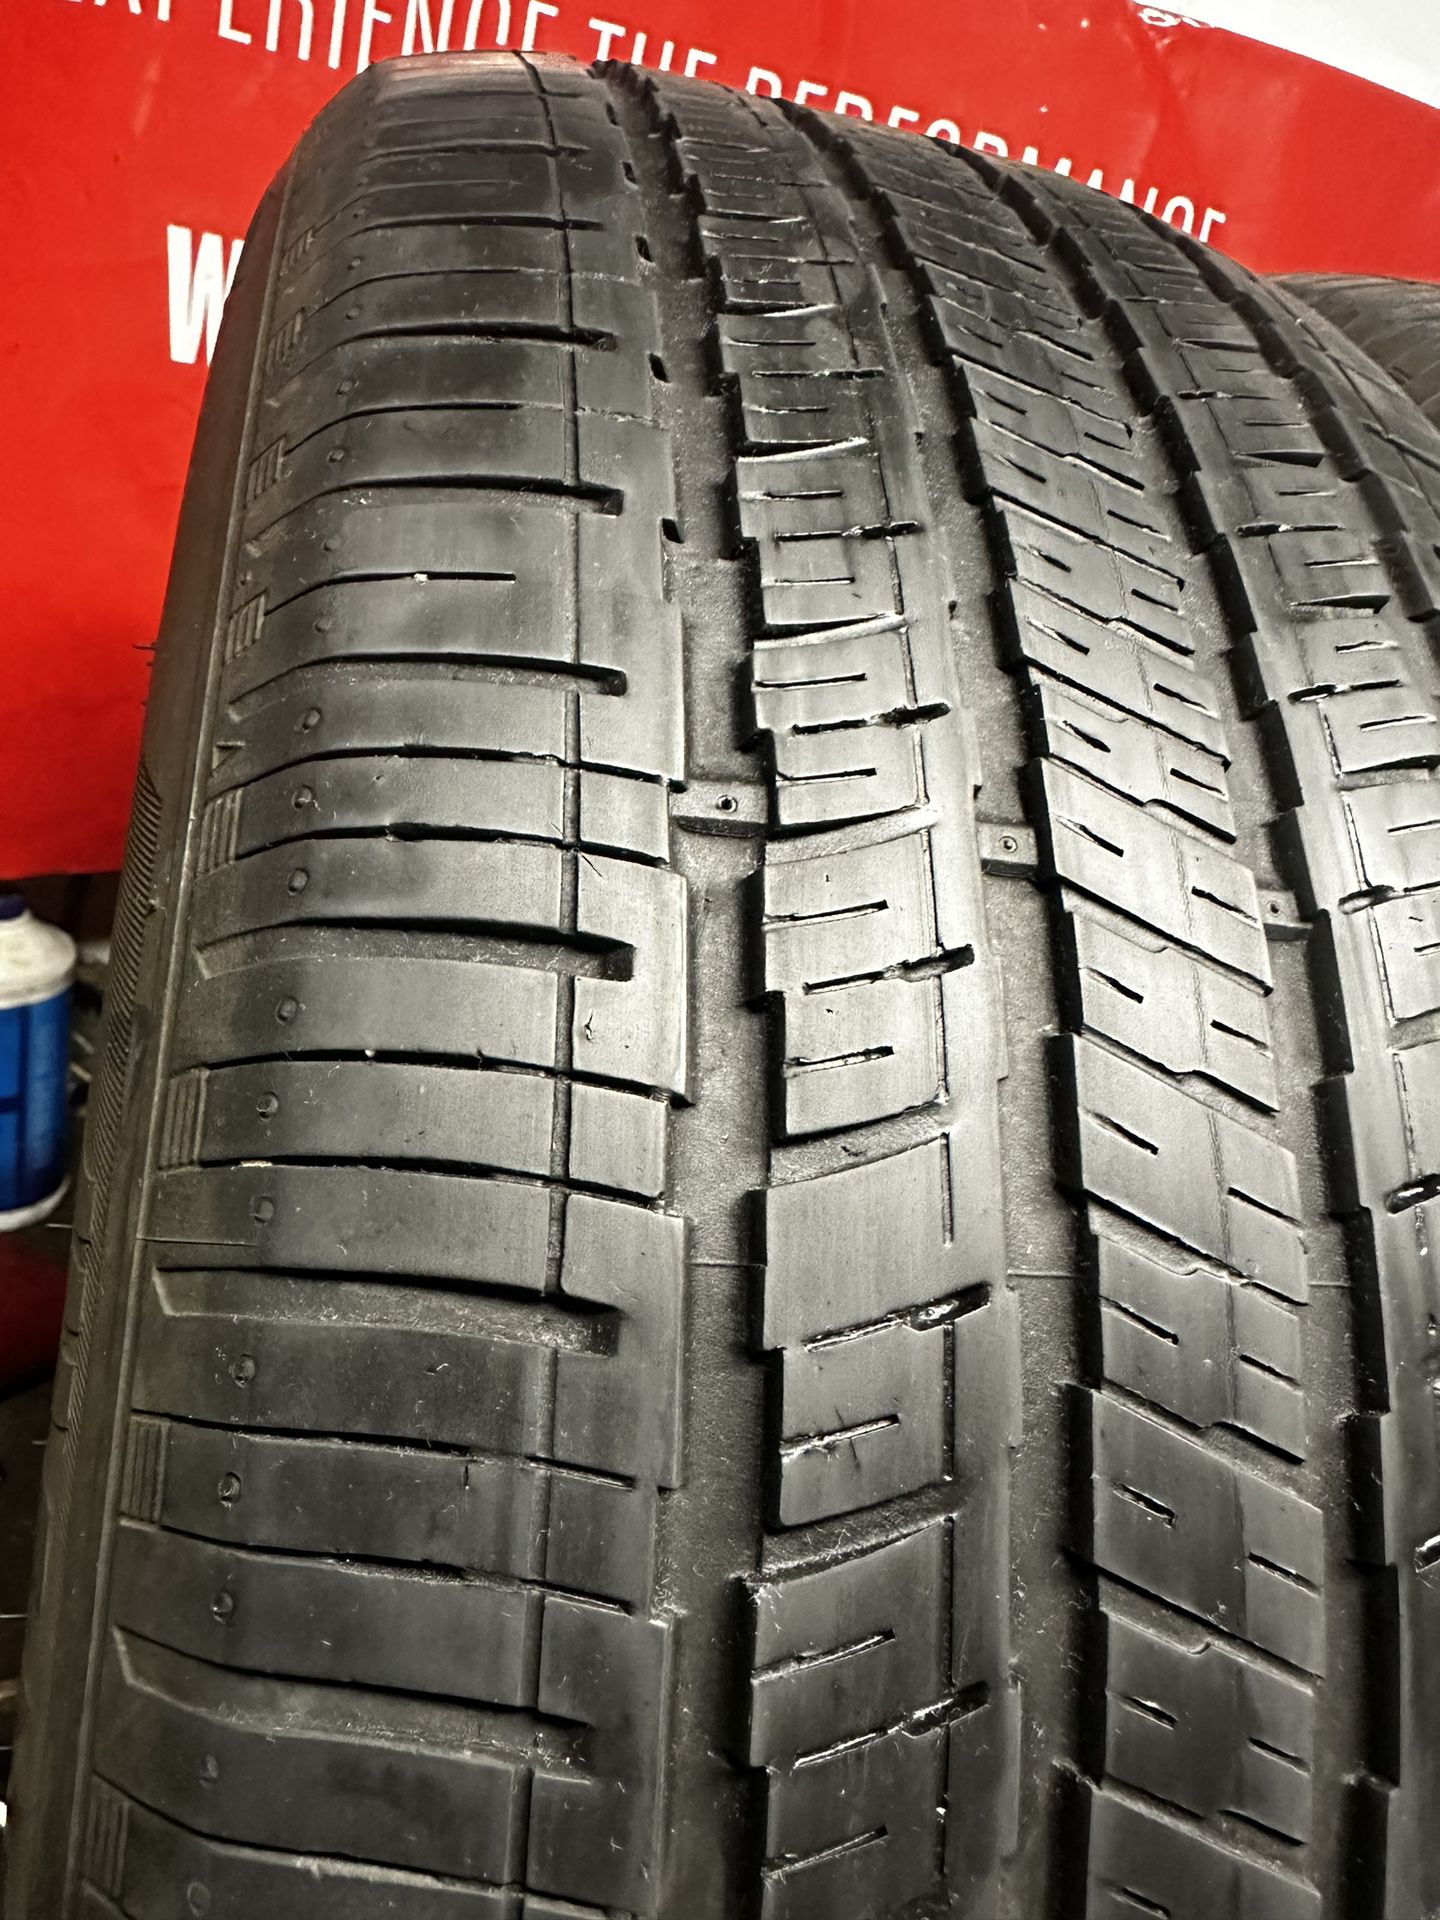 Hankook Tires 225/55R 17 Great Condition Two Tires For $60